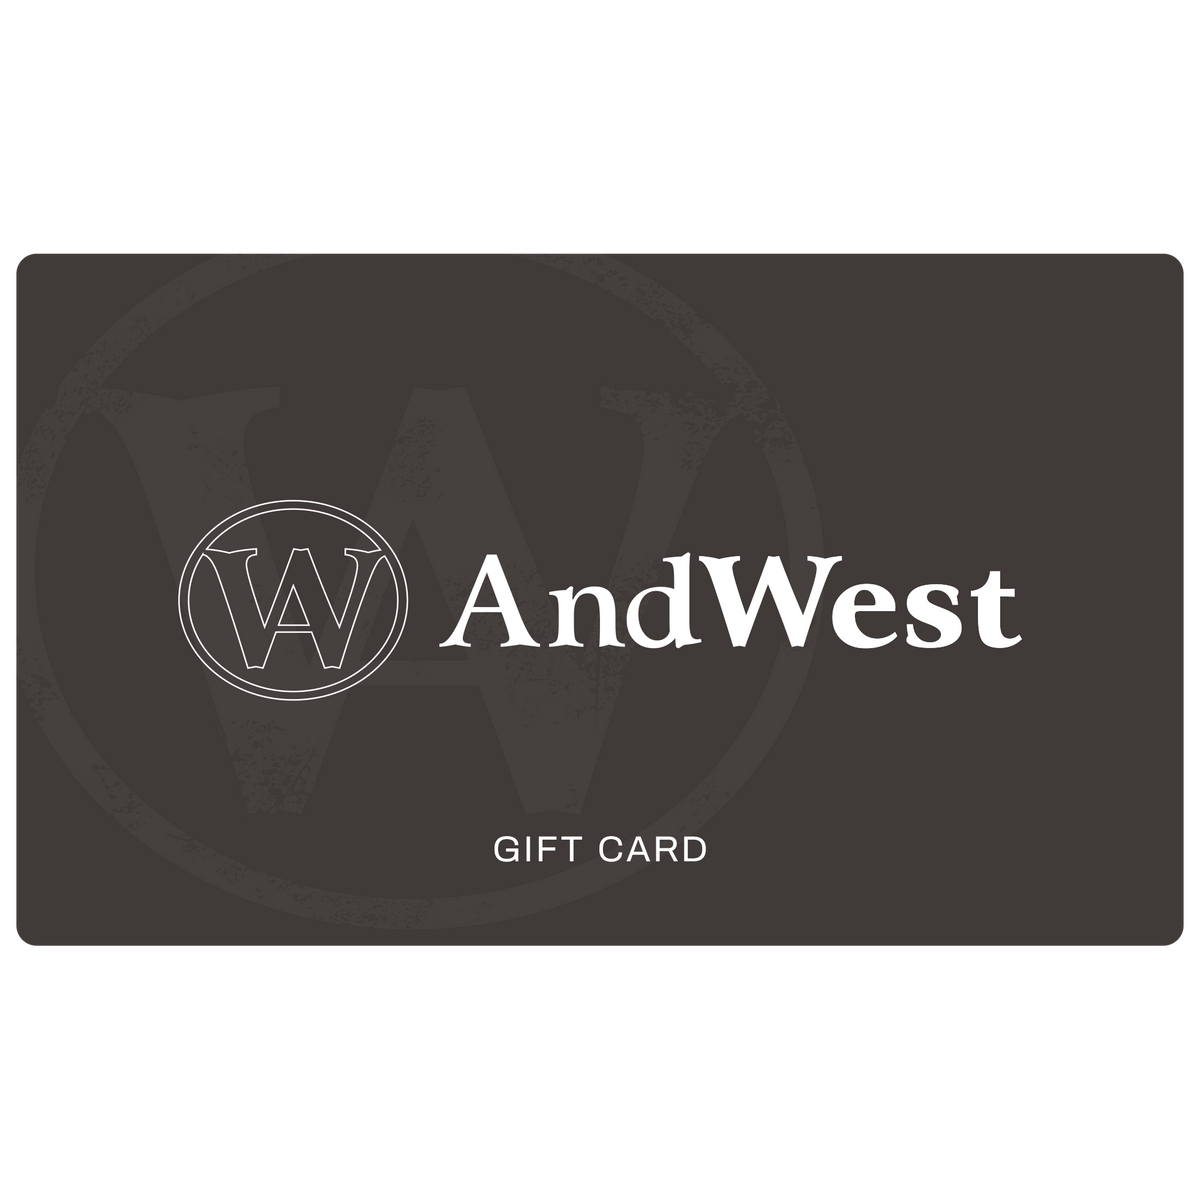 AndWest Gift Card